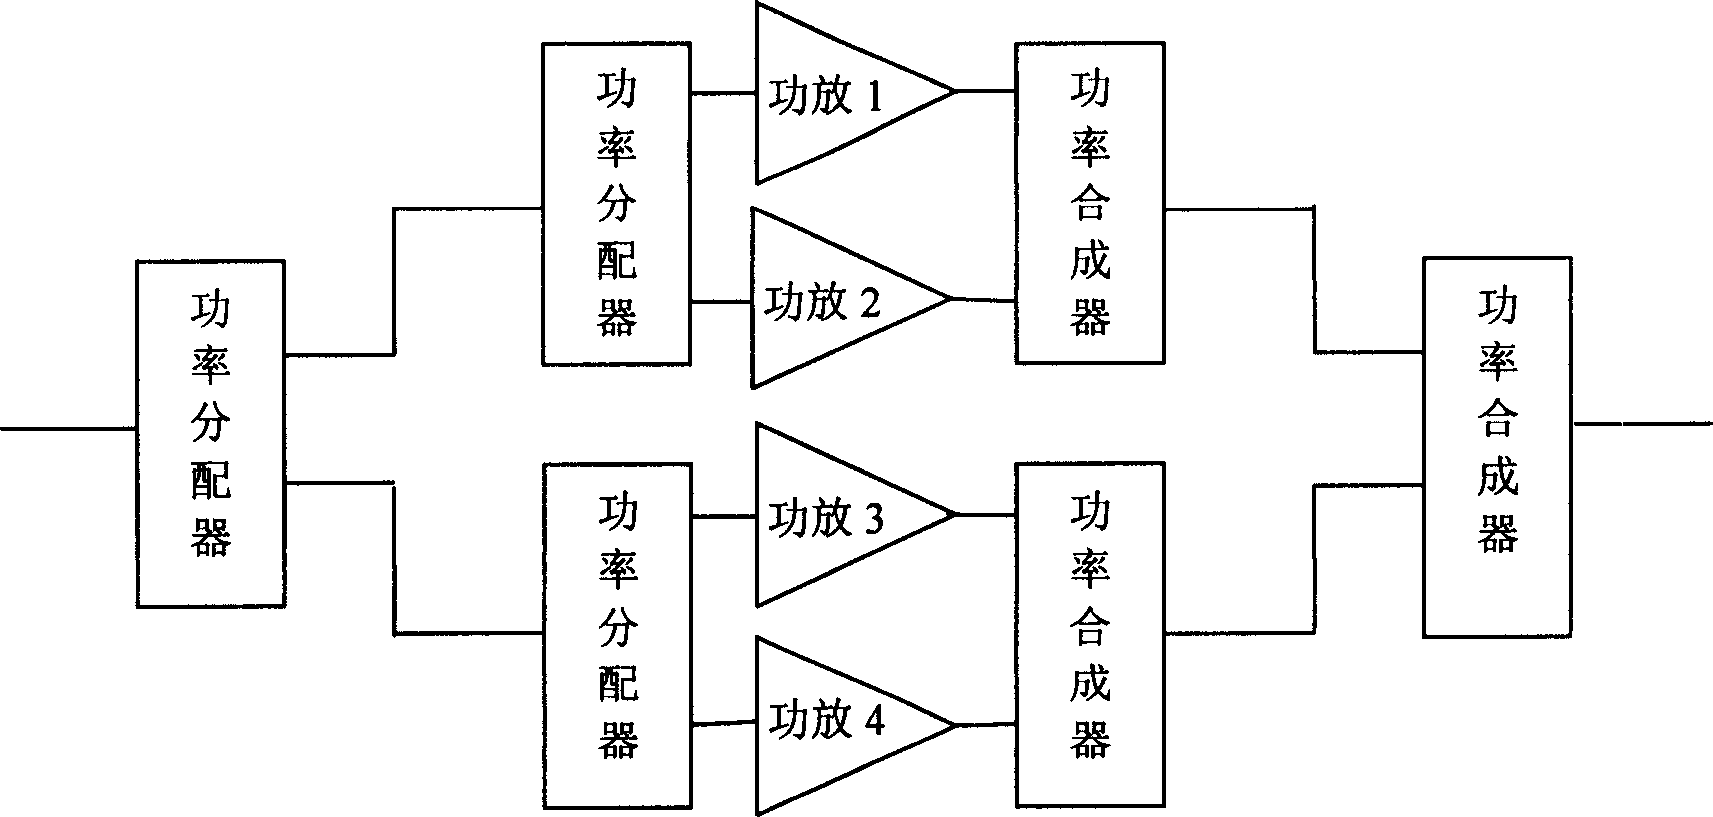 High power millimeter wave upper frequency converter power amplification assembly based on three branch combining network